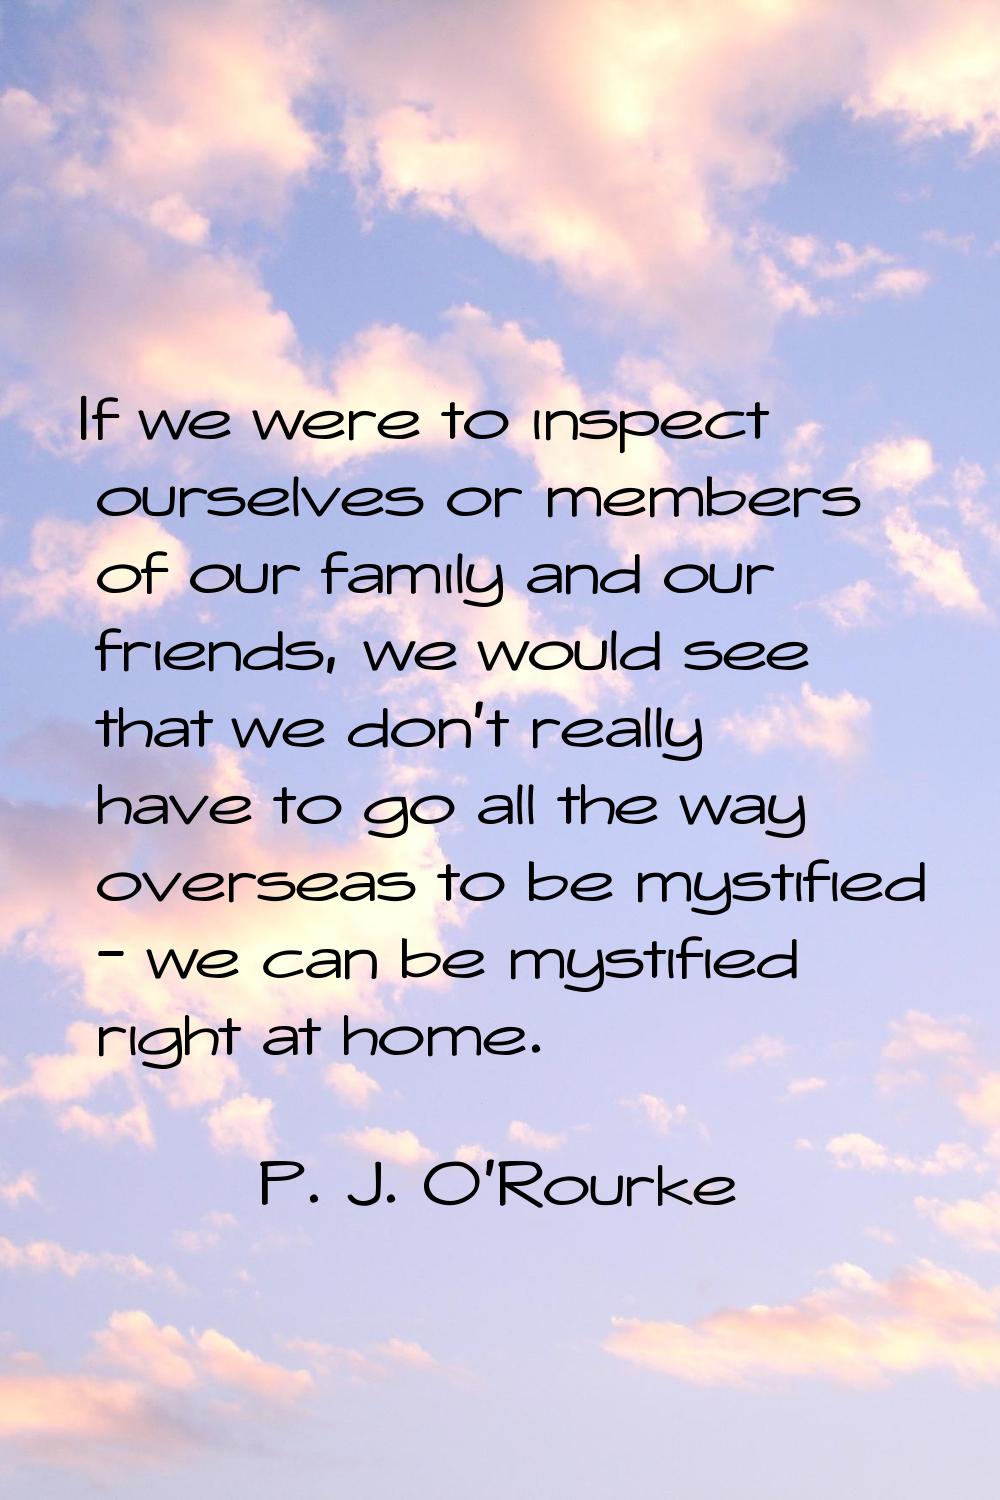 If we were to inspect ourselves or members of our family and our friends, we would see that we don'